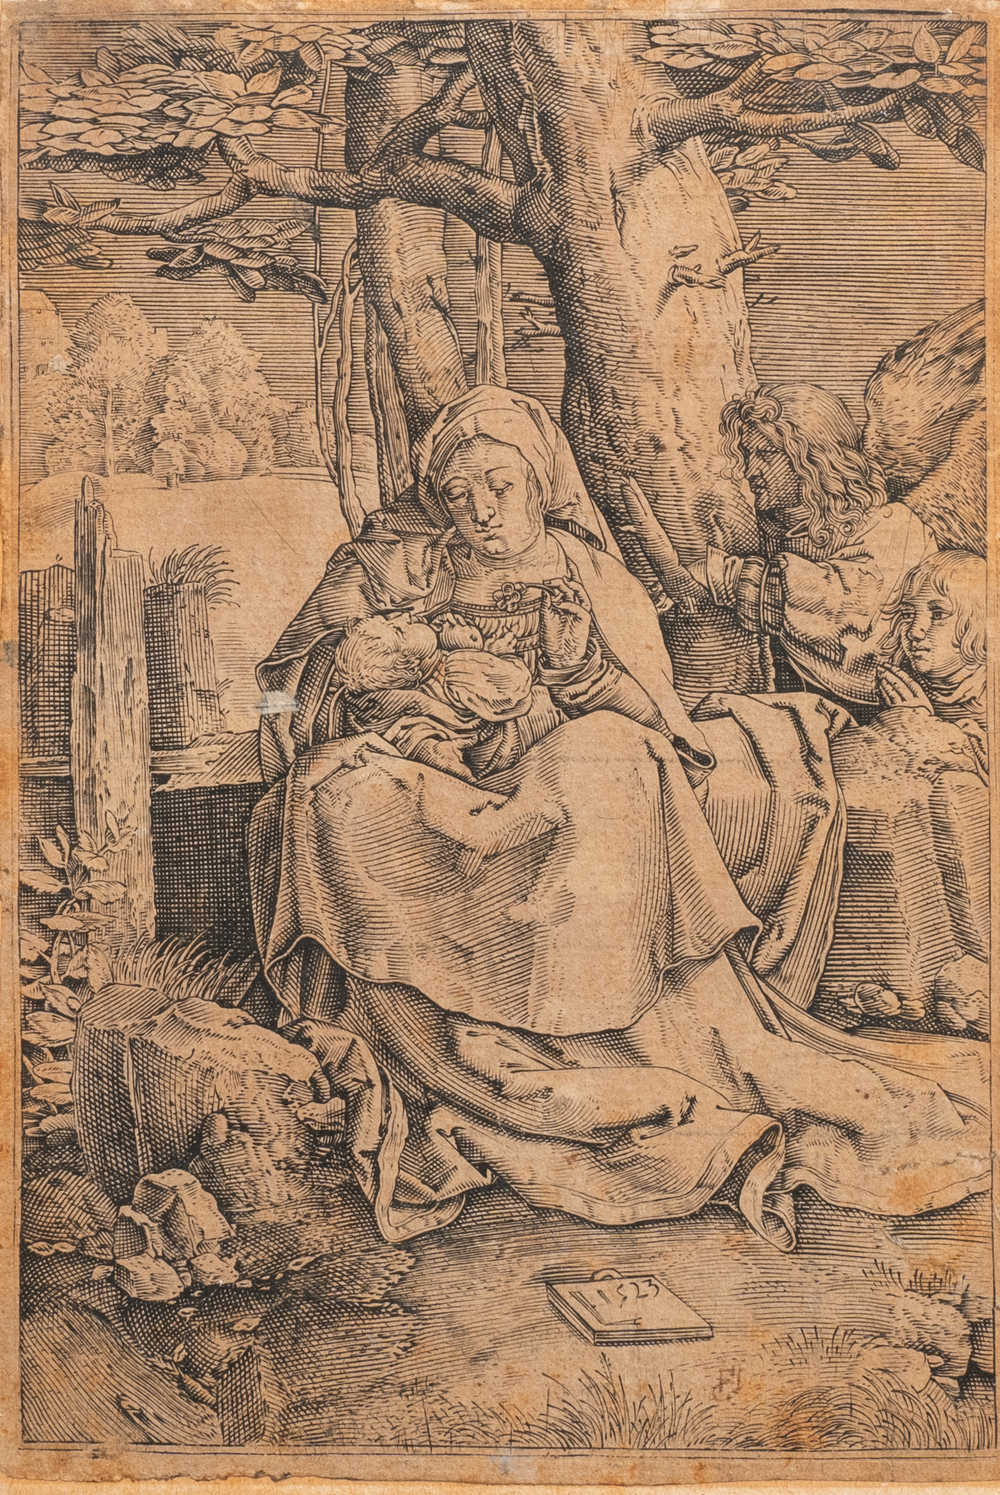 After Lucas van Leyden (1494 - 1533), etching on paper, 16th C.: The Virgin and Child with two angels